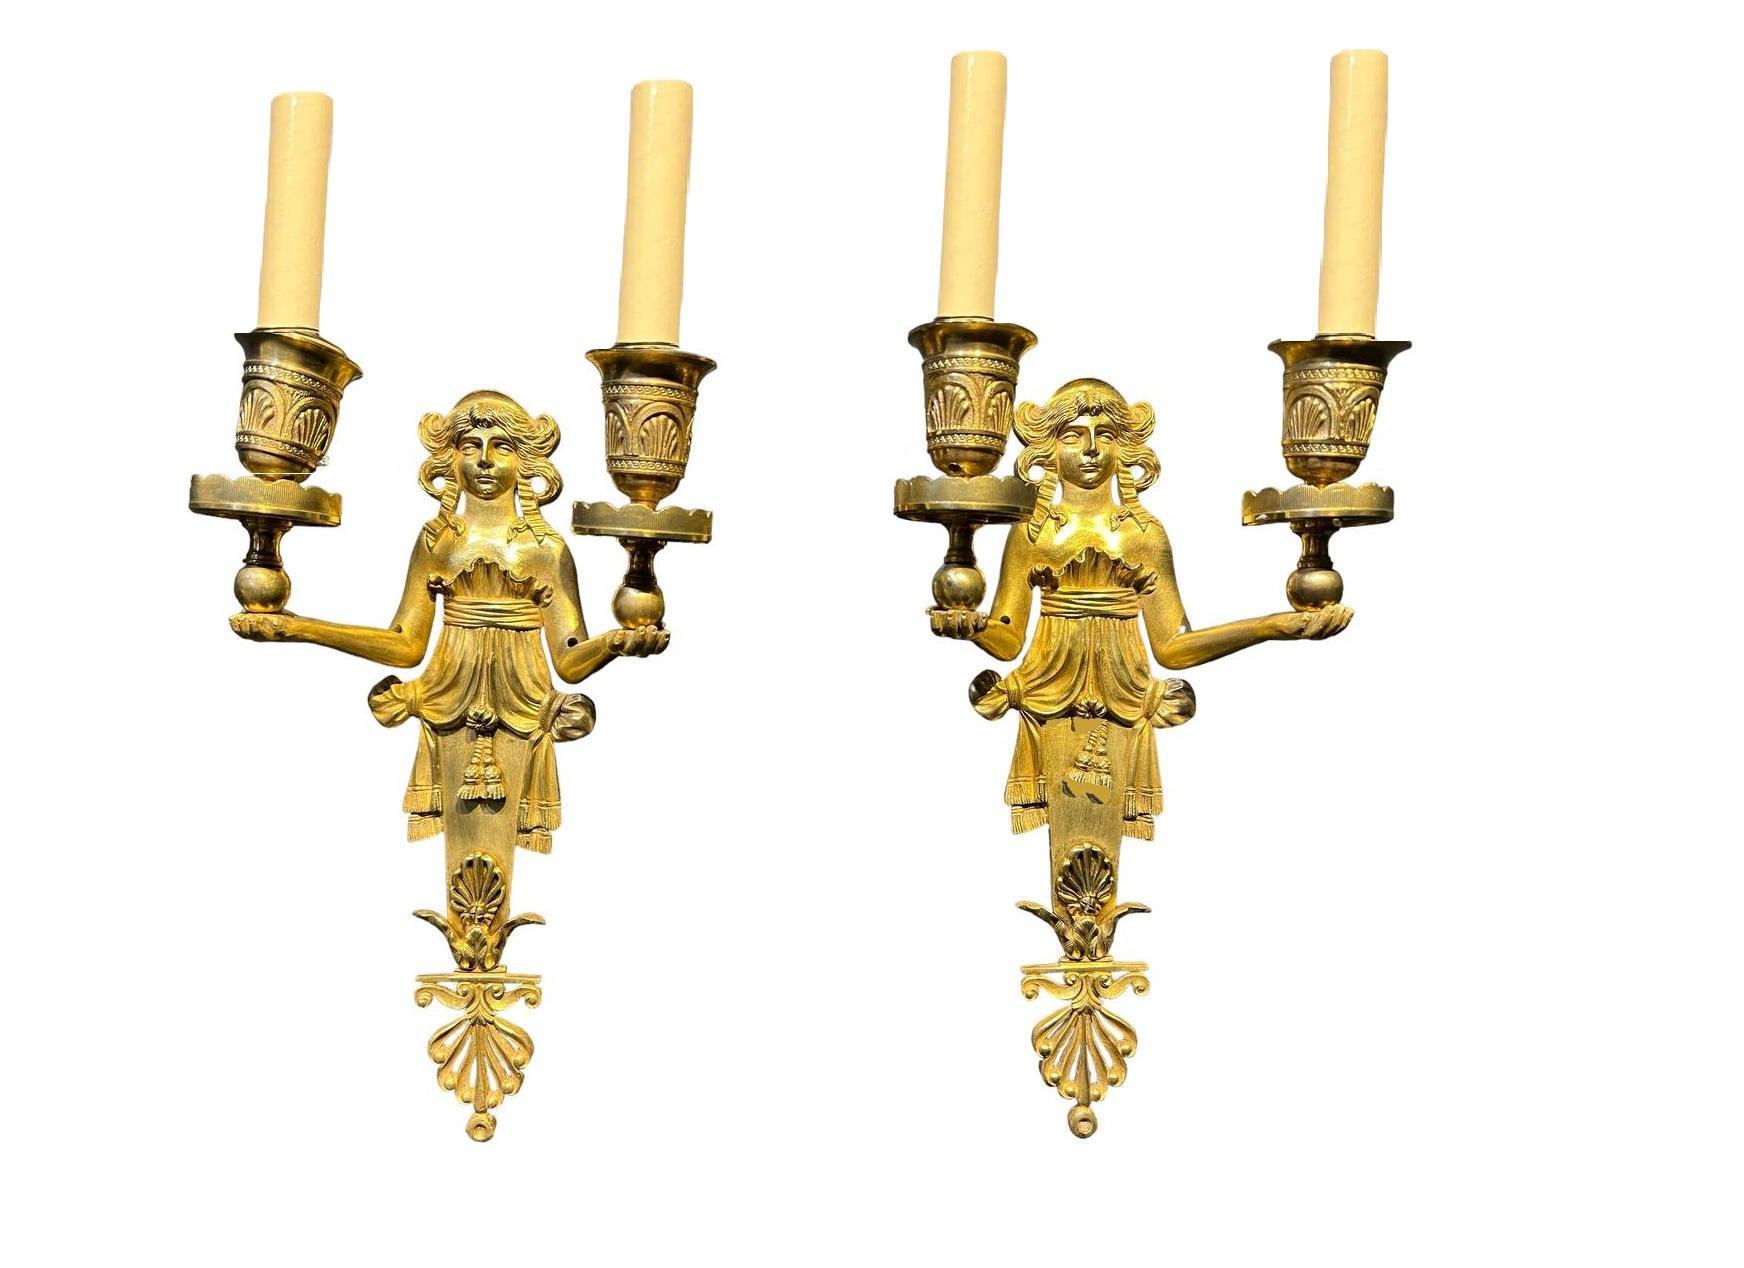 A pair of late 19th century French Empire gilt bronze small sconces. Unusual design with woman holding balls